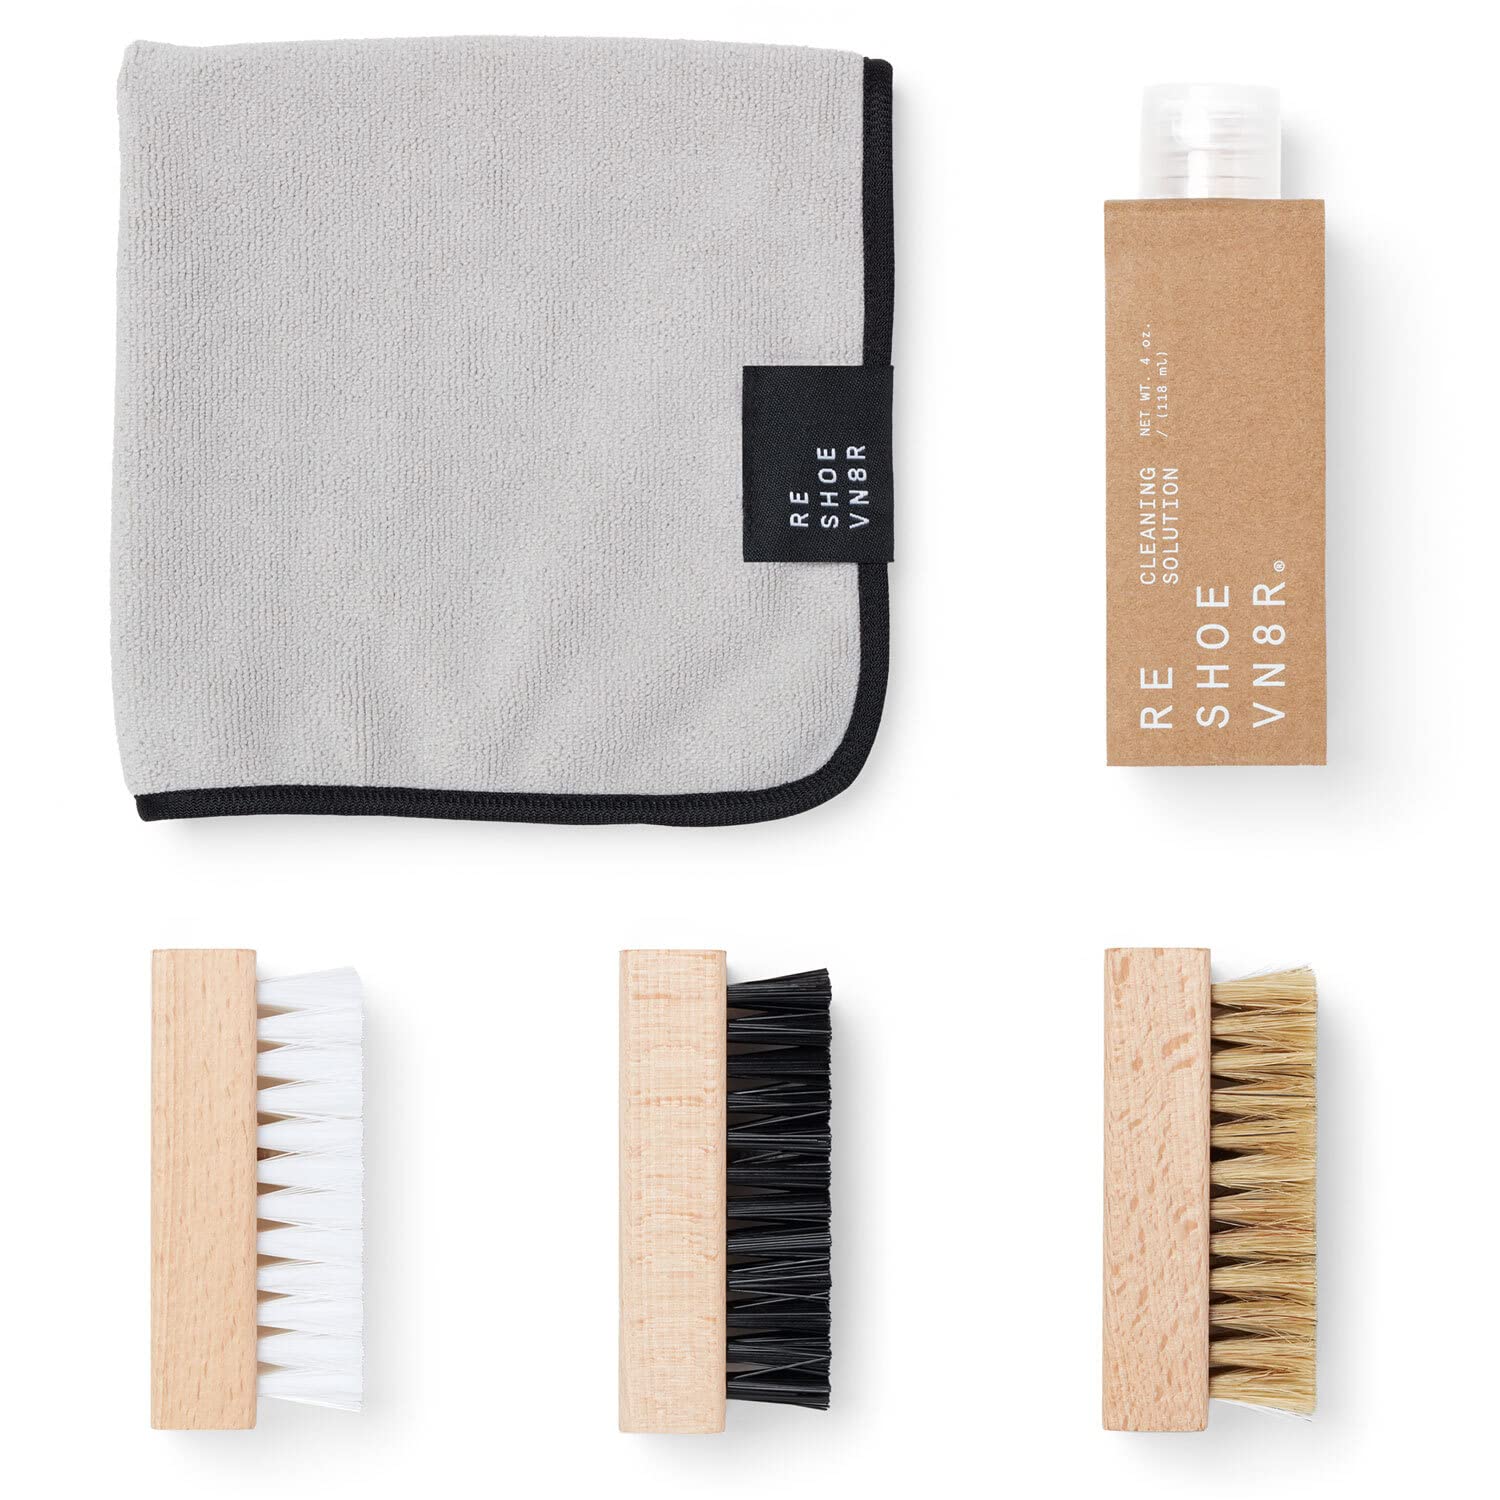 Jason Markk Essential Shoe Cleaning Kit Review: the Only Cleaner I Use